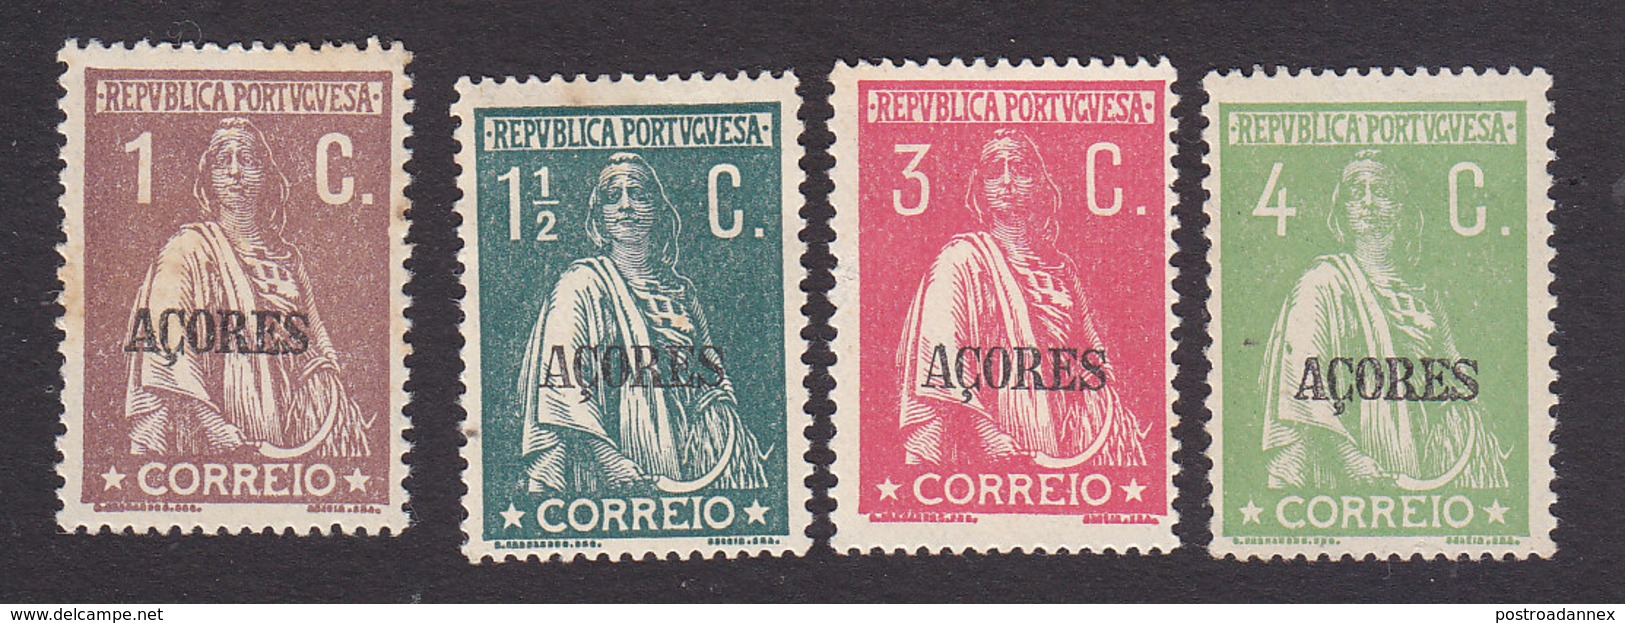 Azores, Scott #158, 160, 164, 167, Mint Hinged, Ceres Overprinted, Issued 1912 - Açores